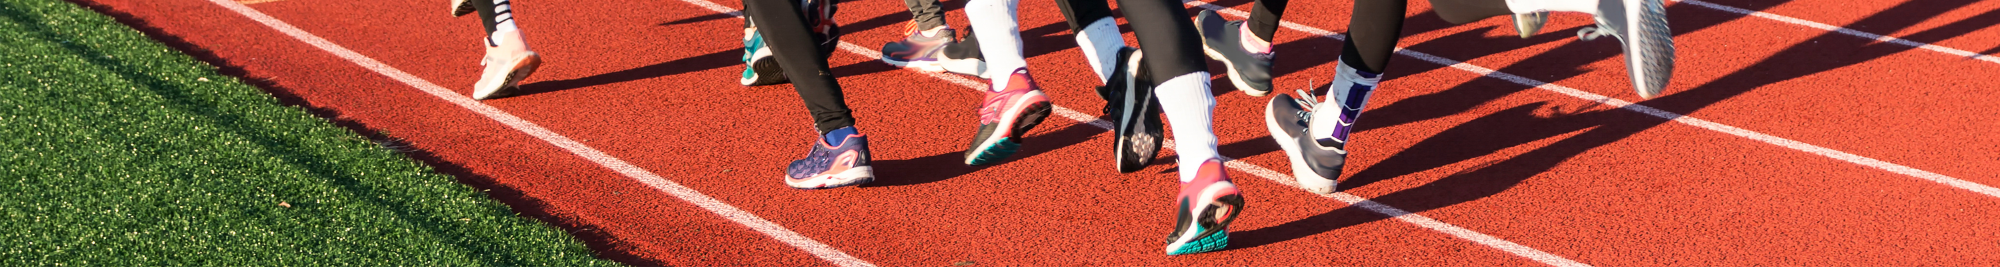 Photograph of a race track and running feet